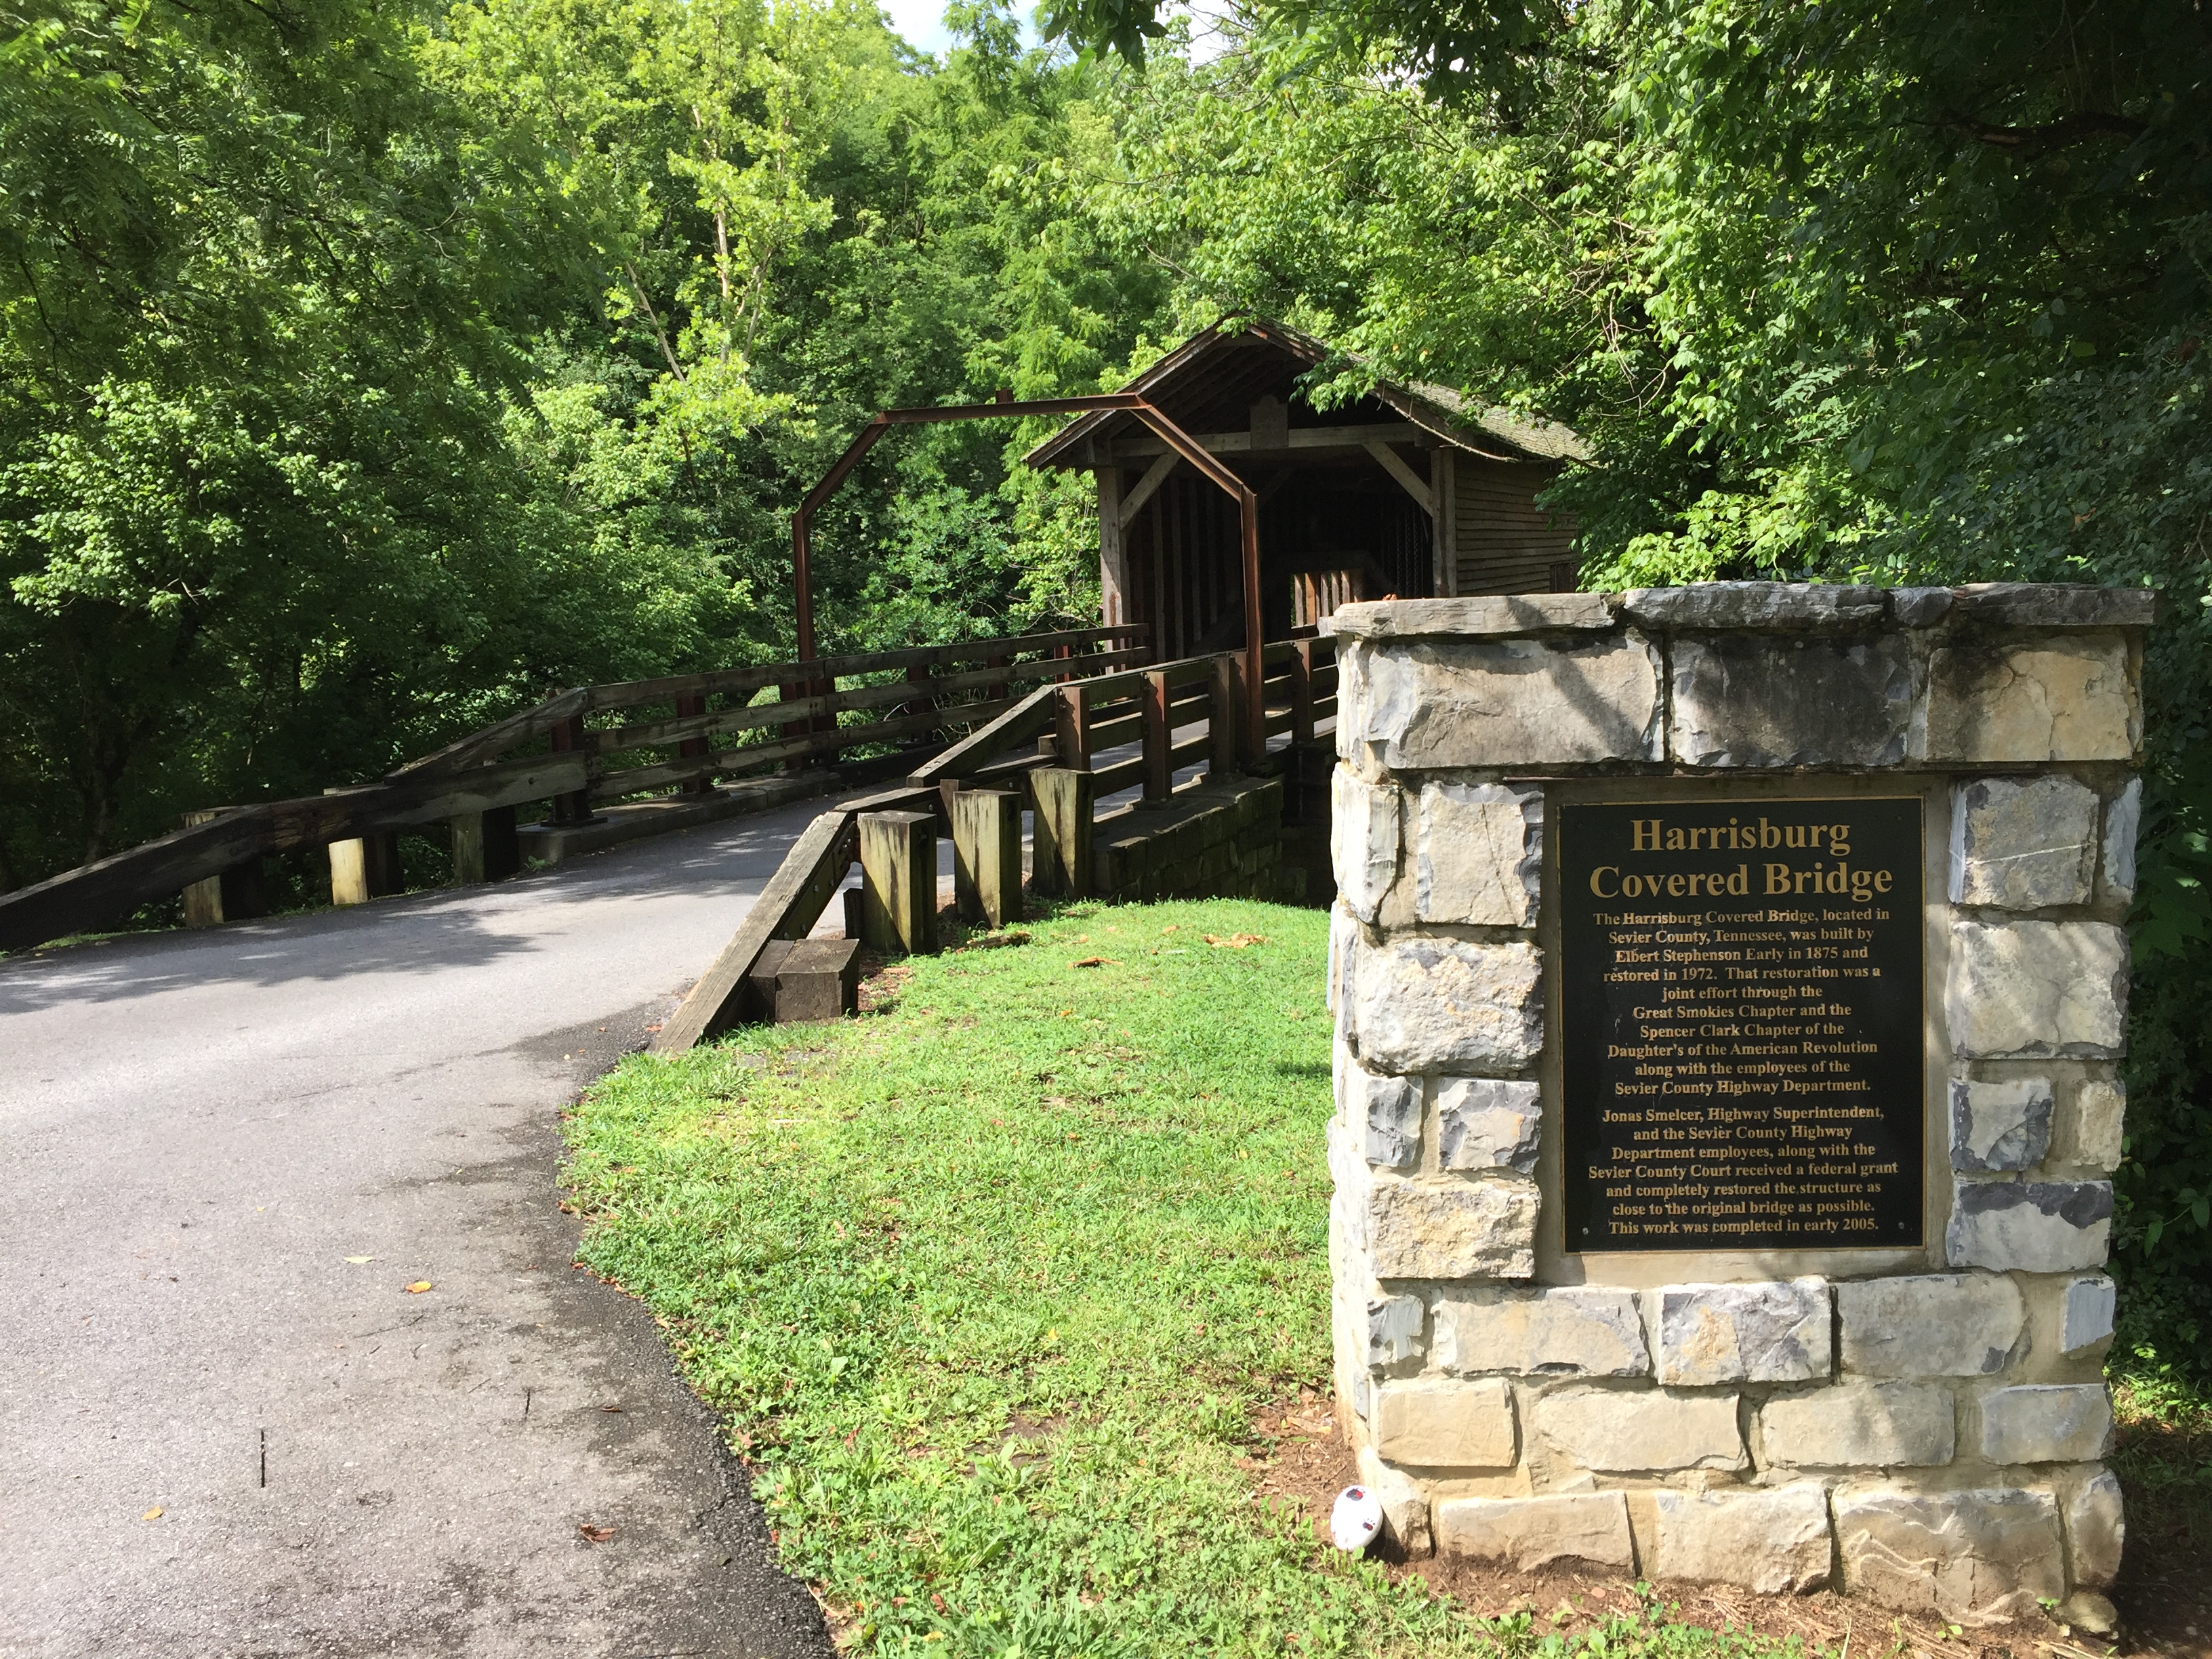 Harrisburg Covered Bridge with historical sign is a great secret spot